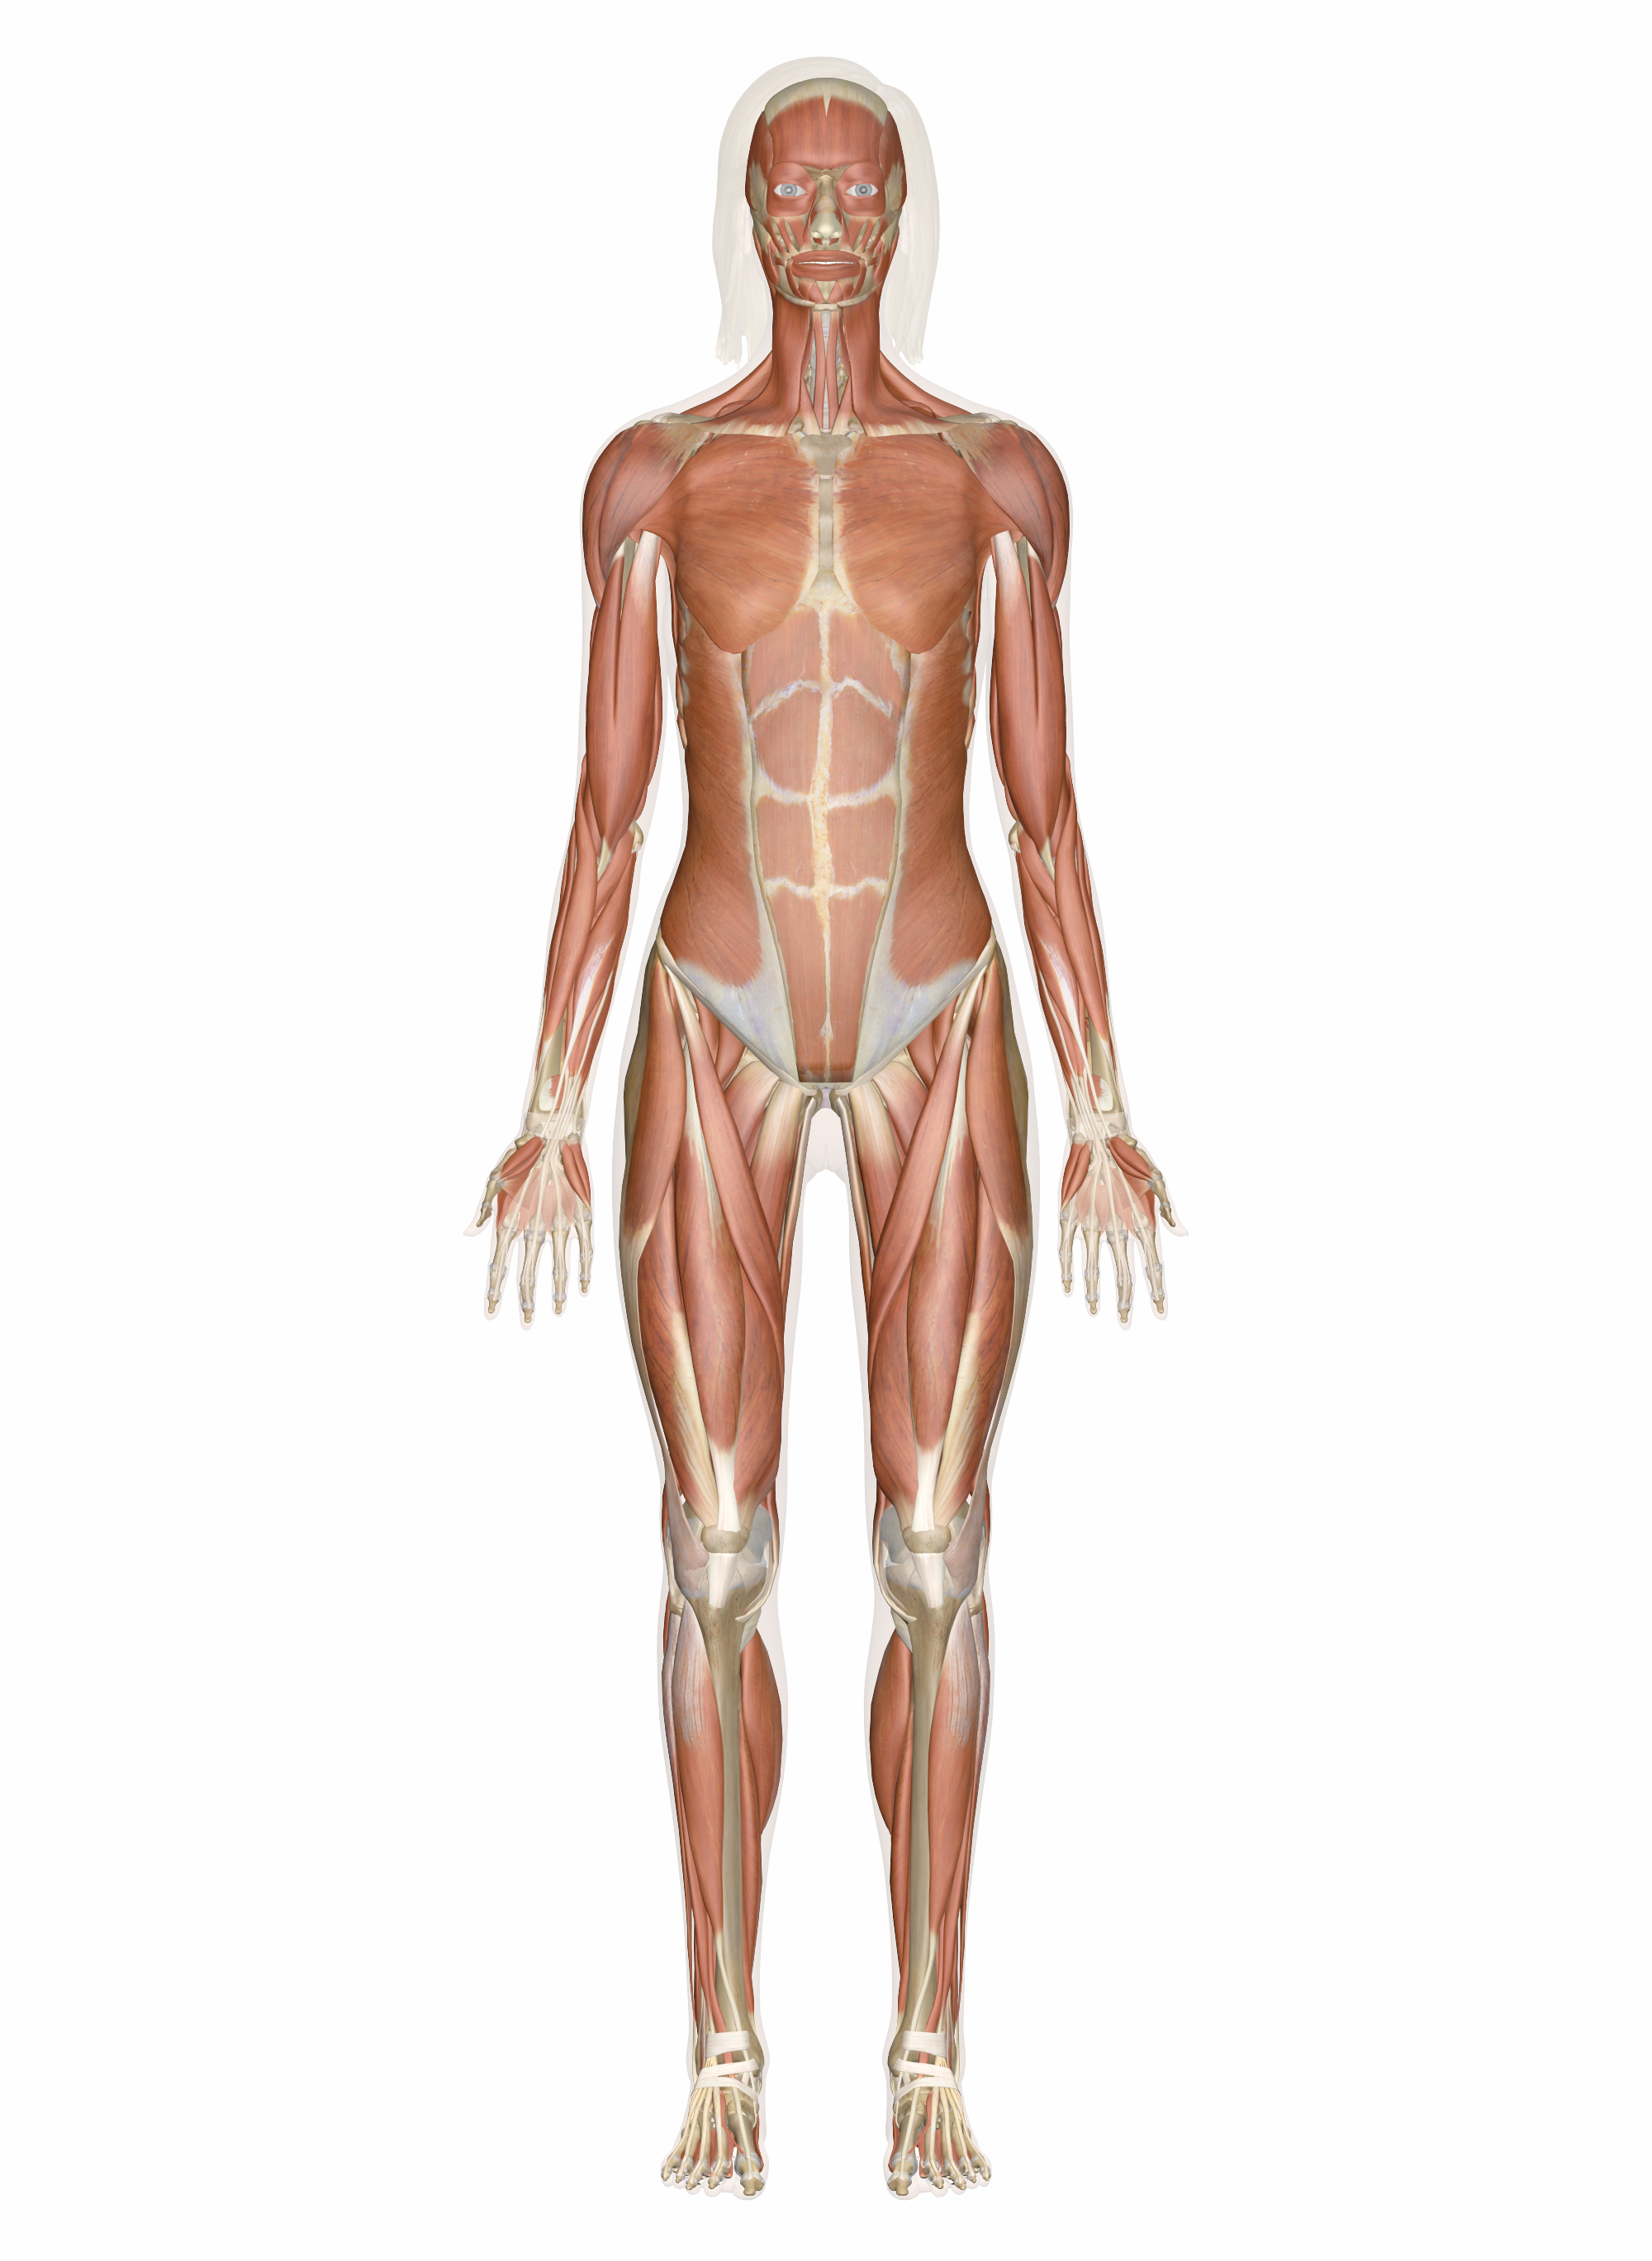 Back Muscles Diagram Muscular System Muscles Of The Human Body